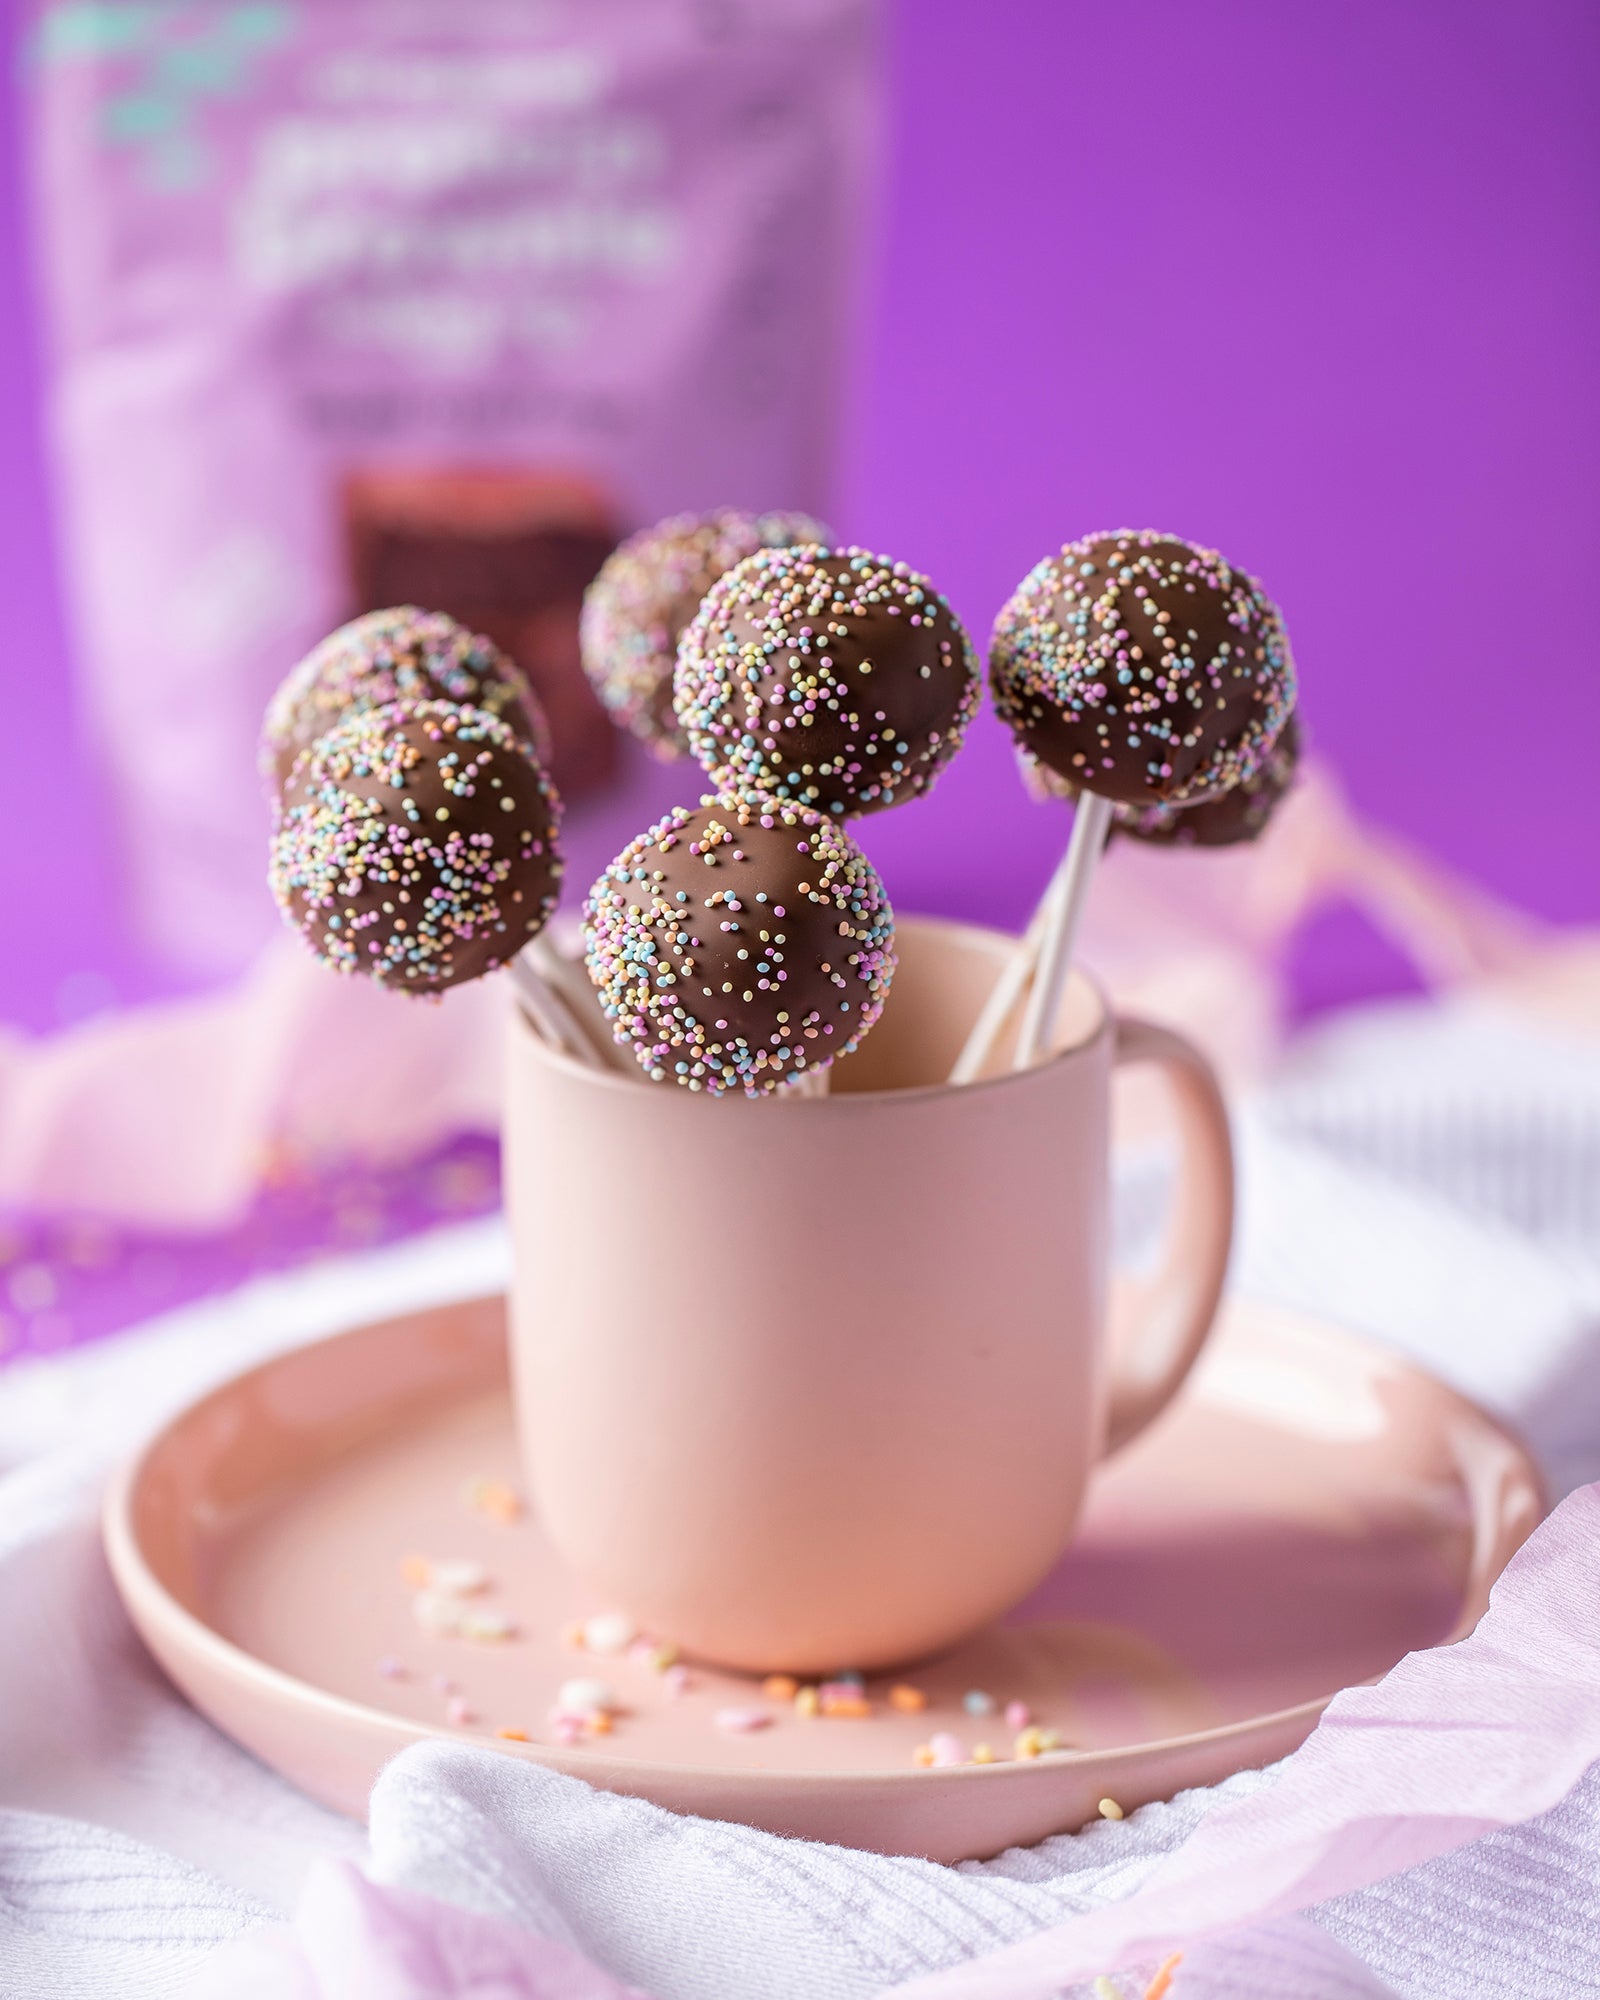 Peppermint Brownie Cake Pops On White Plate With Mug Of Hot Chocolate And  Marshmallows And Candy Canes Stock Photo, Picture And Royalty Free Image.  Image 24121244.